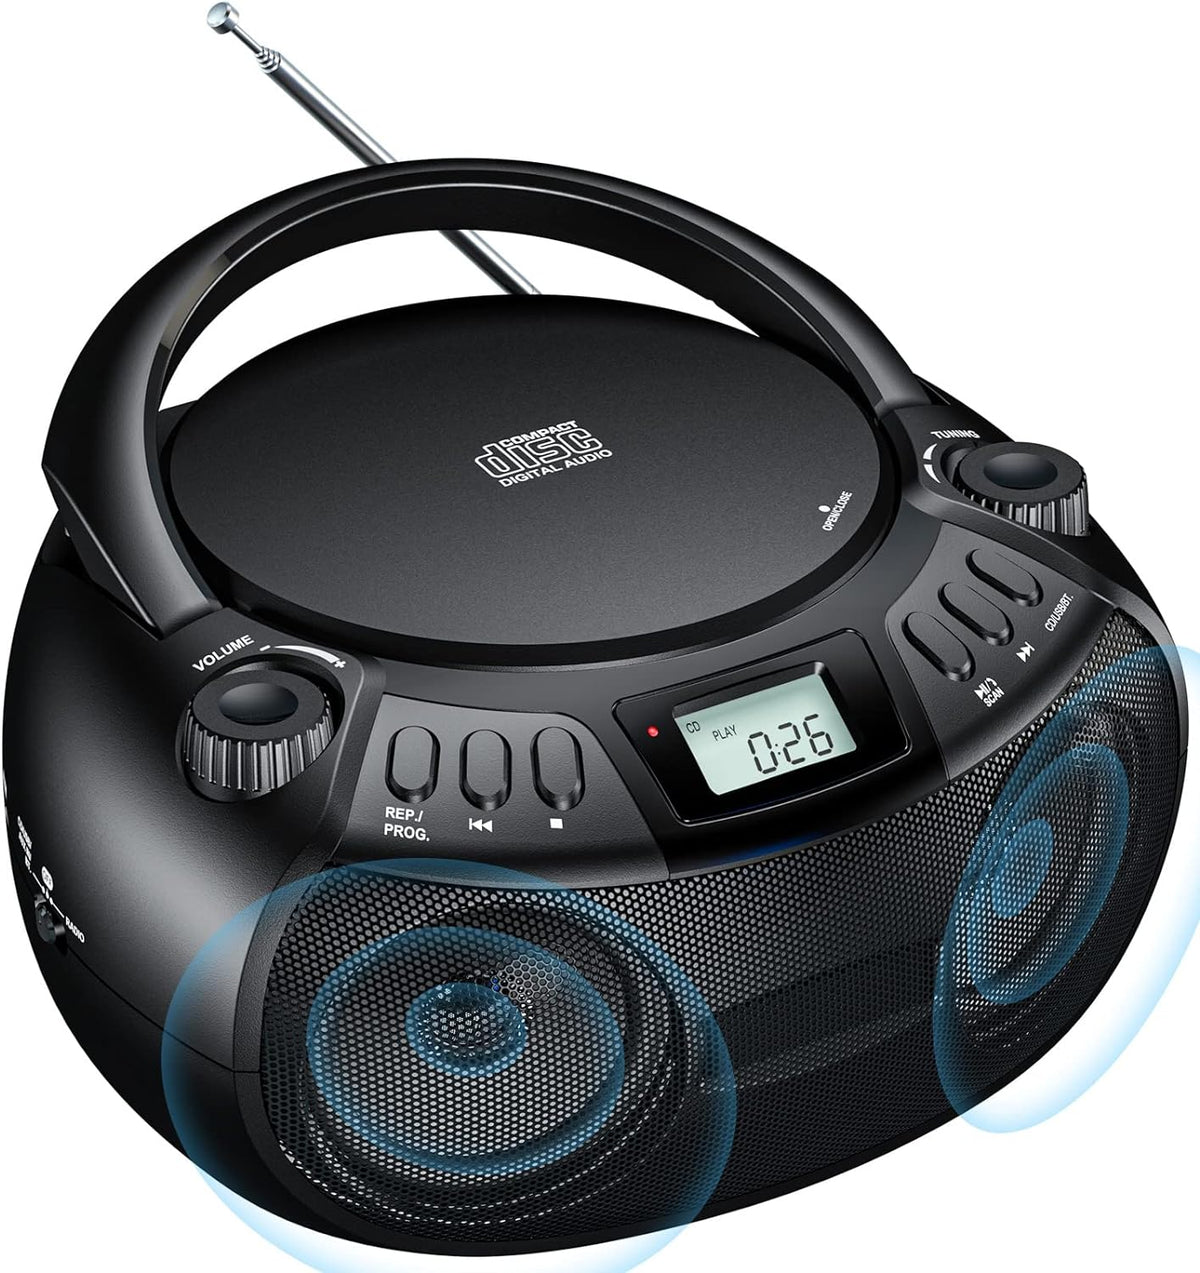 Portable CD Player Boombox Stereo Sound Speaker with Bluetooth AM/FM Radio